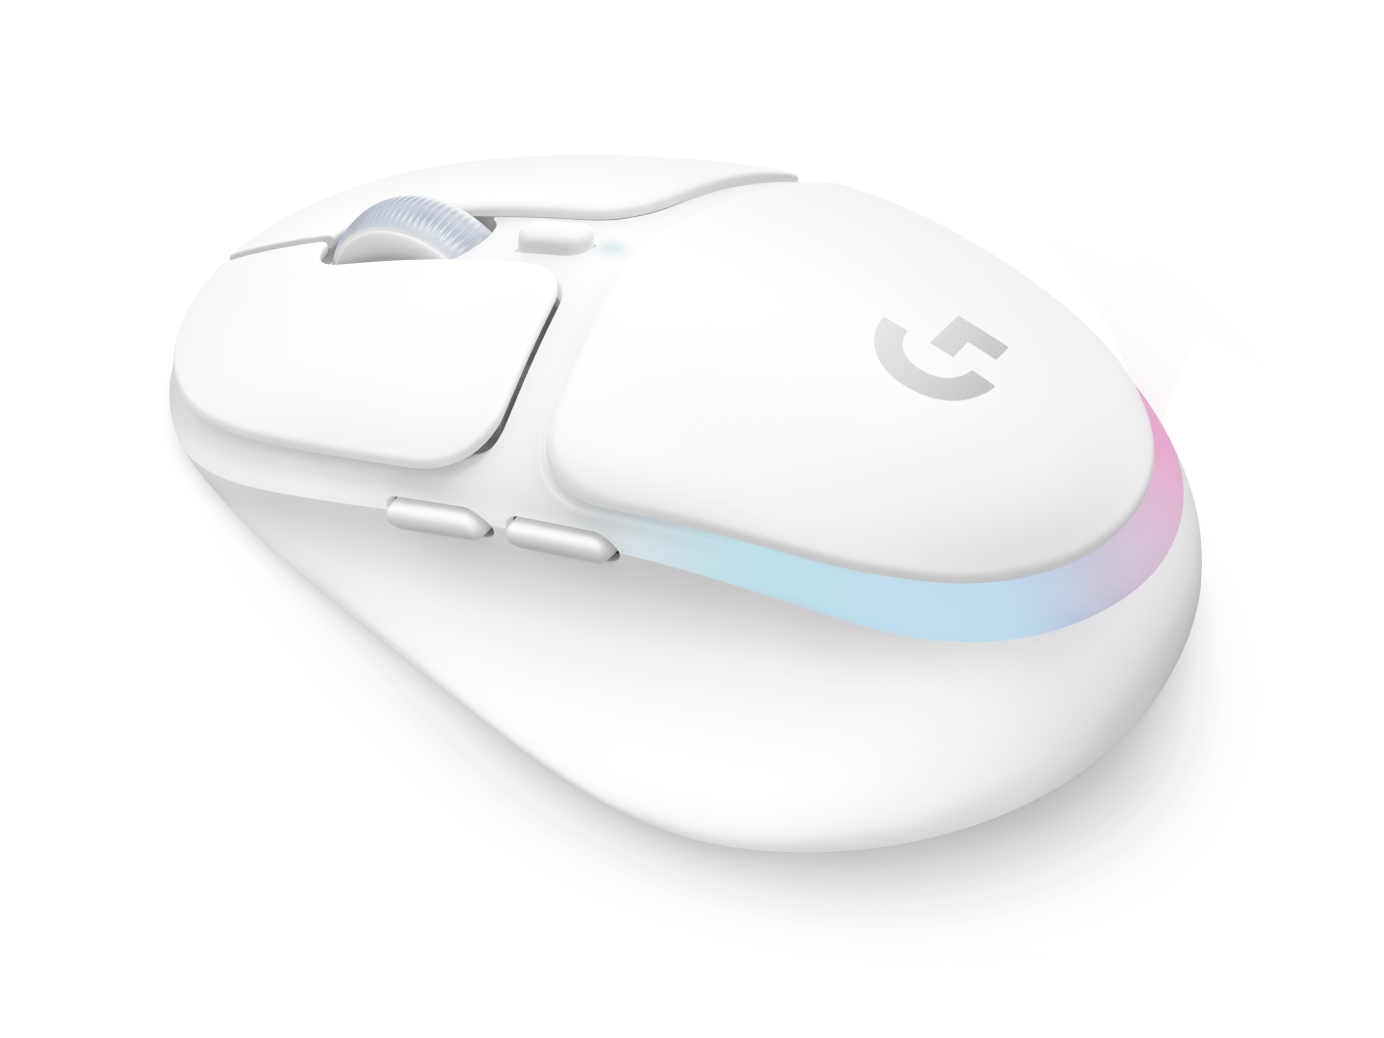 G705 Wireless Gaming Mouse for Logitech G